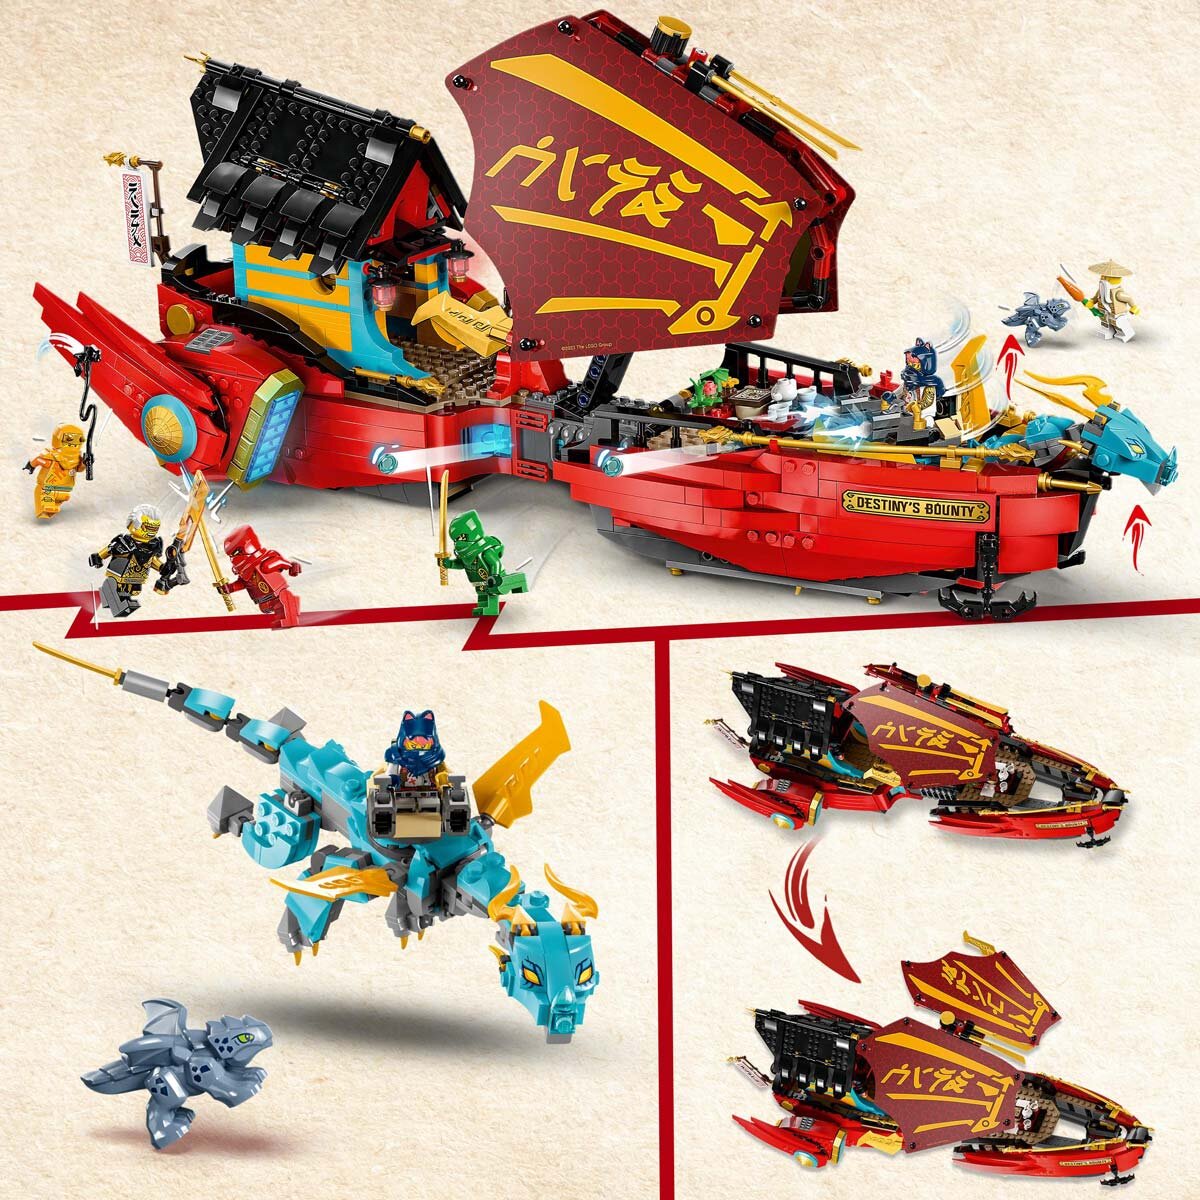 Buy LEGO Destiny's Bounty - race against time Feature Image at Costco.co.uk